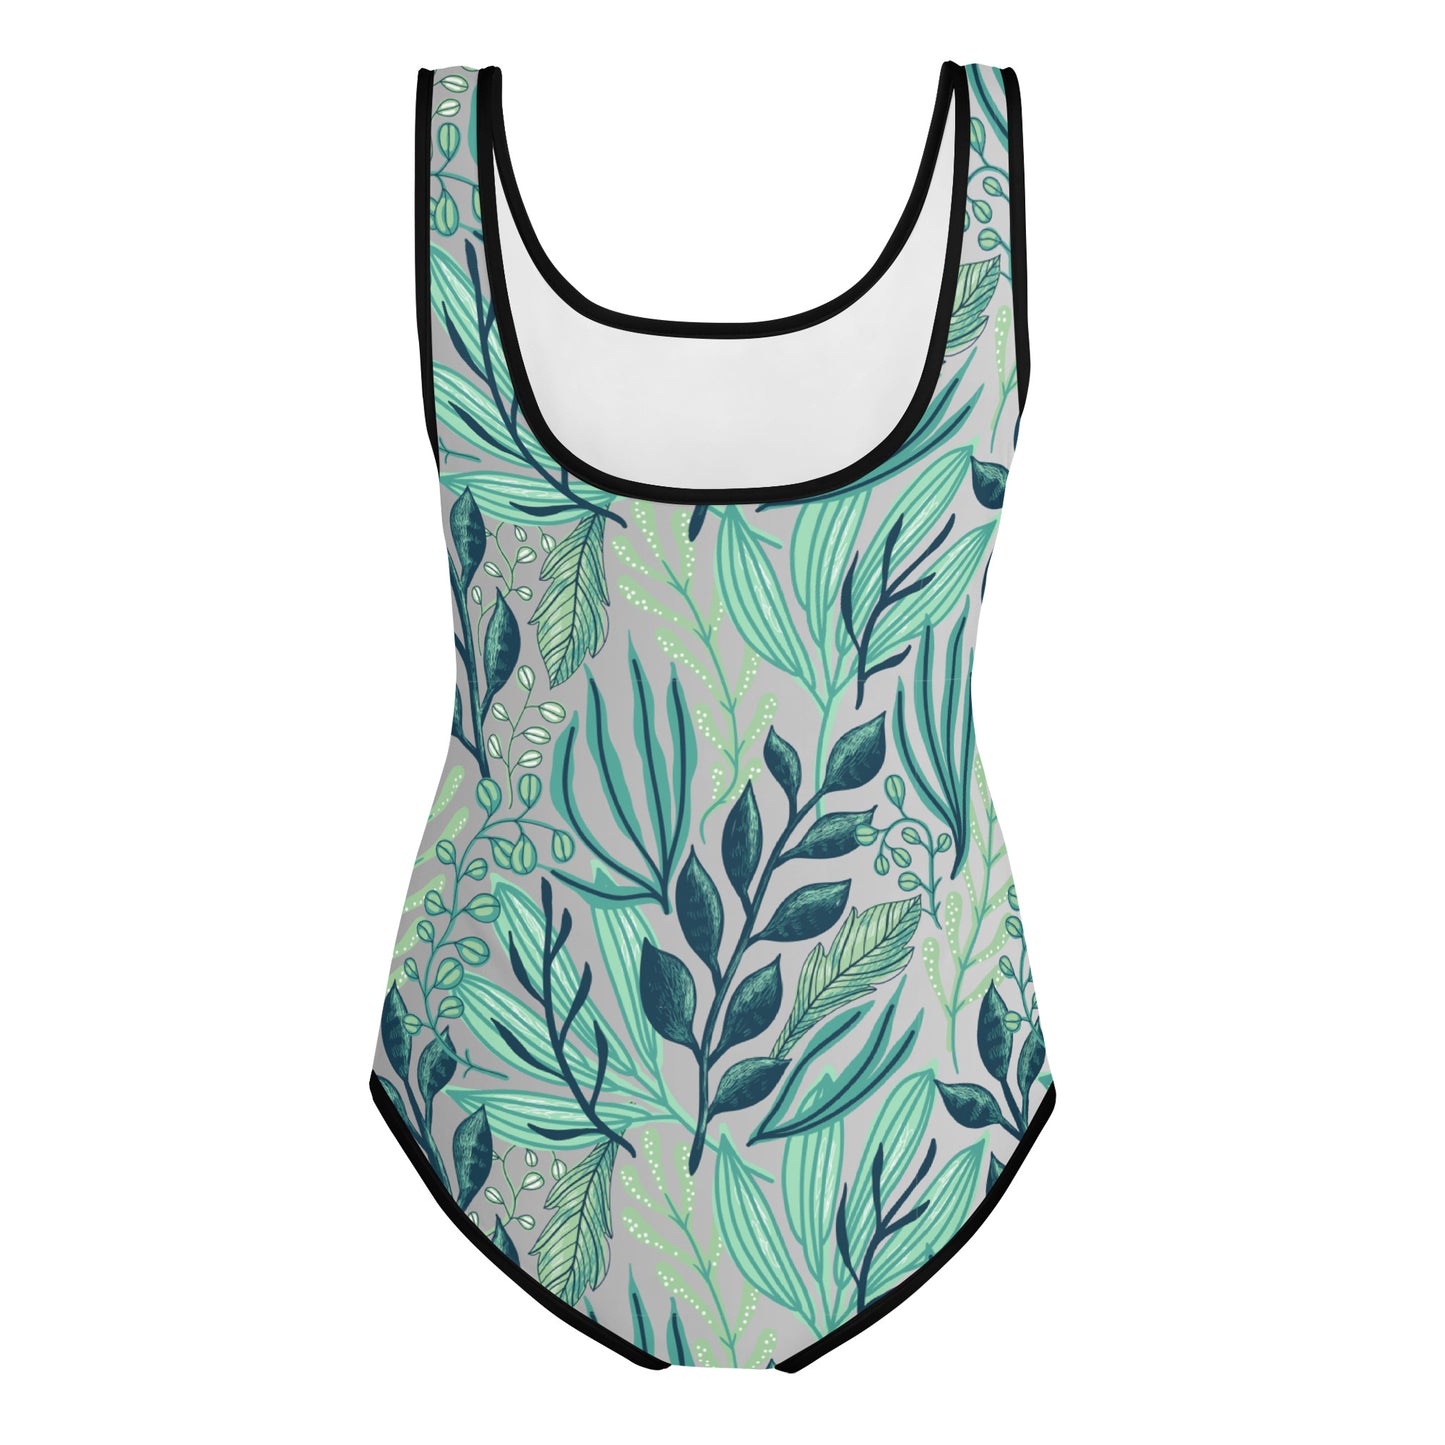 Sea Blossom Print Youth Swimsuit